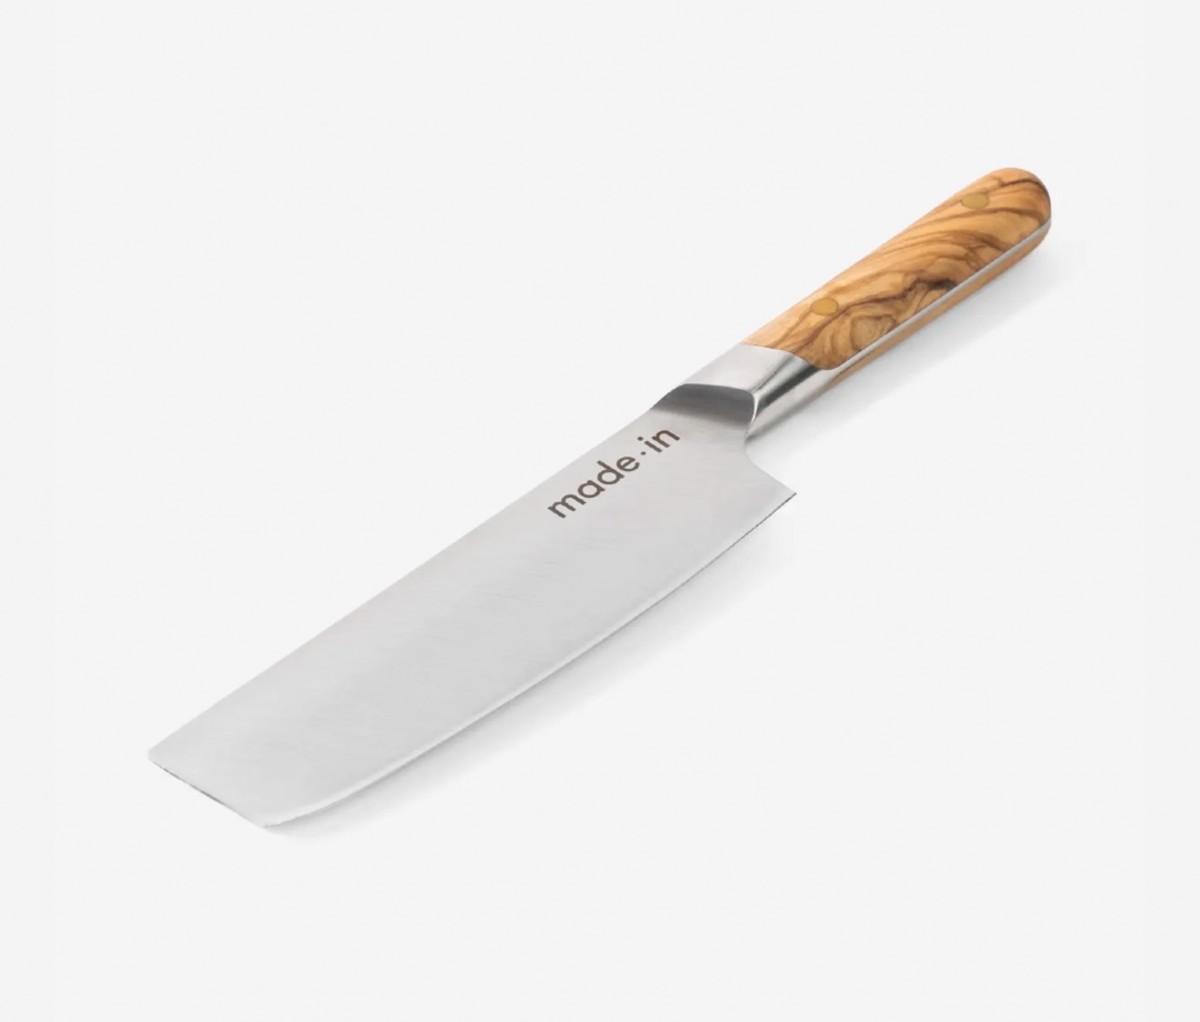 3 Best Kitchen Knives Every Chef Needs in Their Arsenal – Schmidt